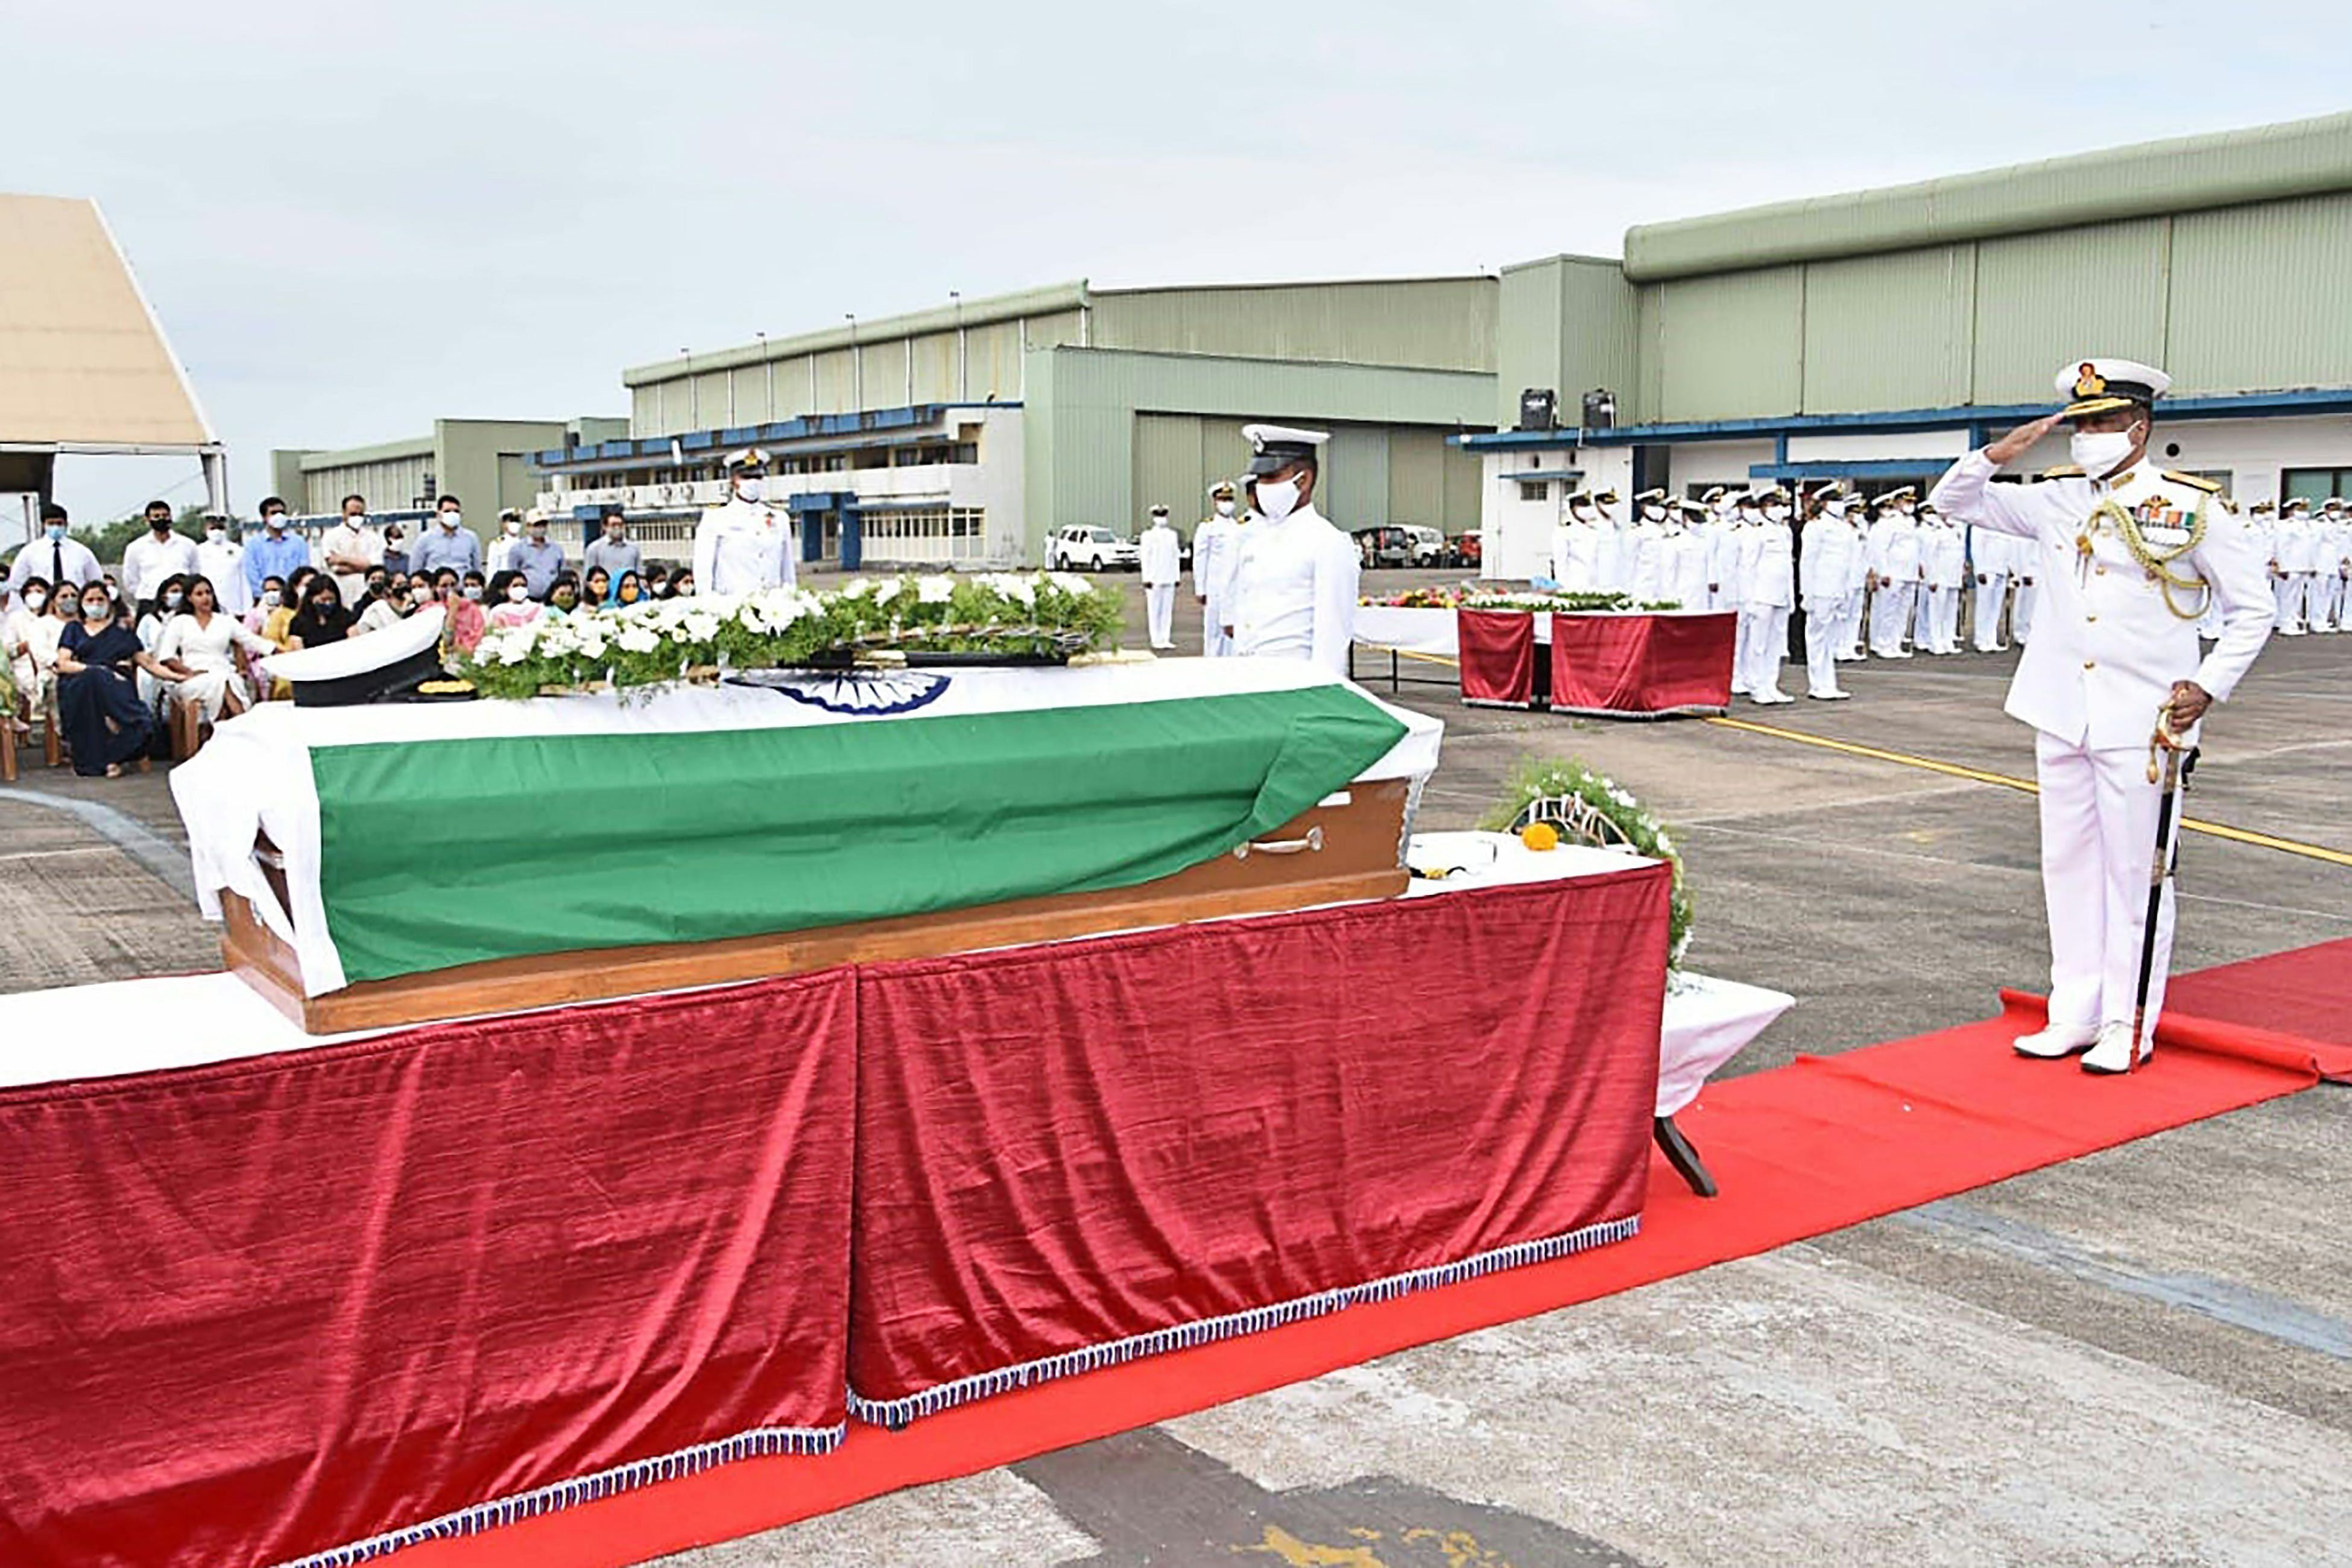  Indian Navy bidding farewell to commander Nishant Singh who lost his life in a MiG-29K aircraft crash off the coast of western Goa state on November 26, in Goa. Credit: Defence Public Relations Office (PRO) of Mumbai/AFP